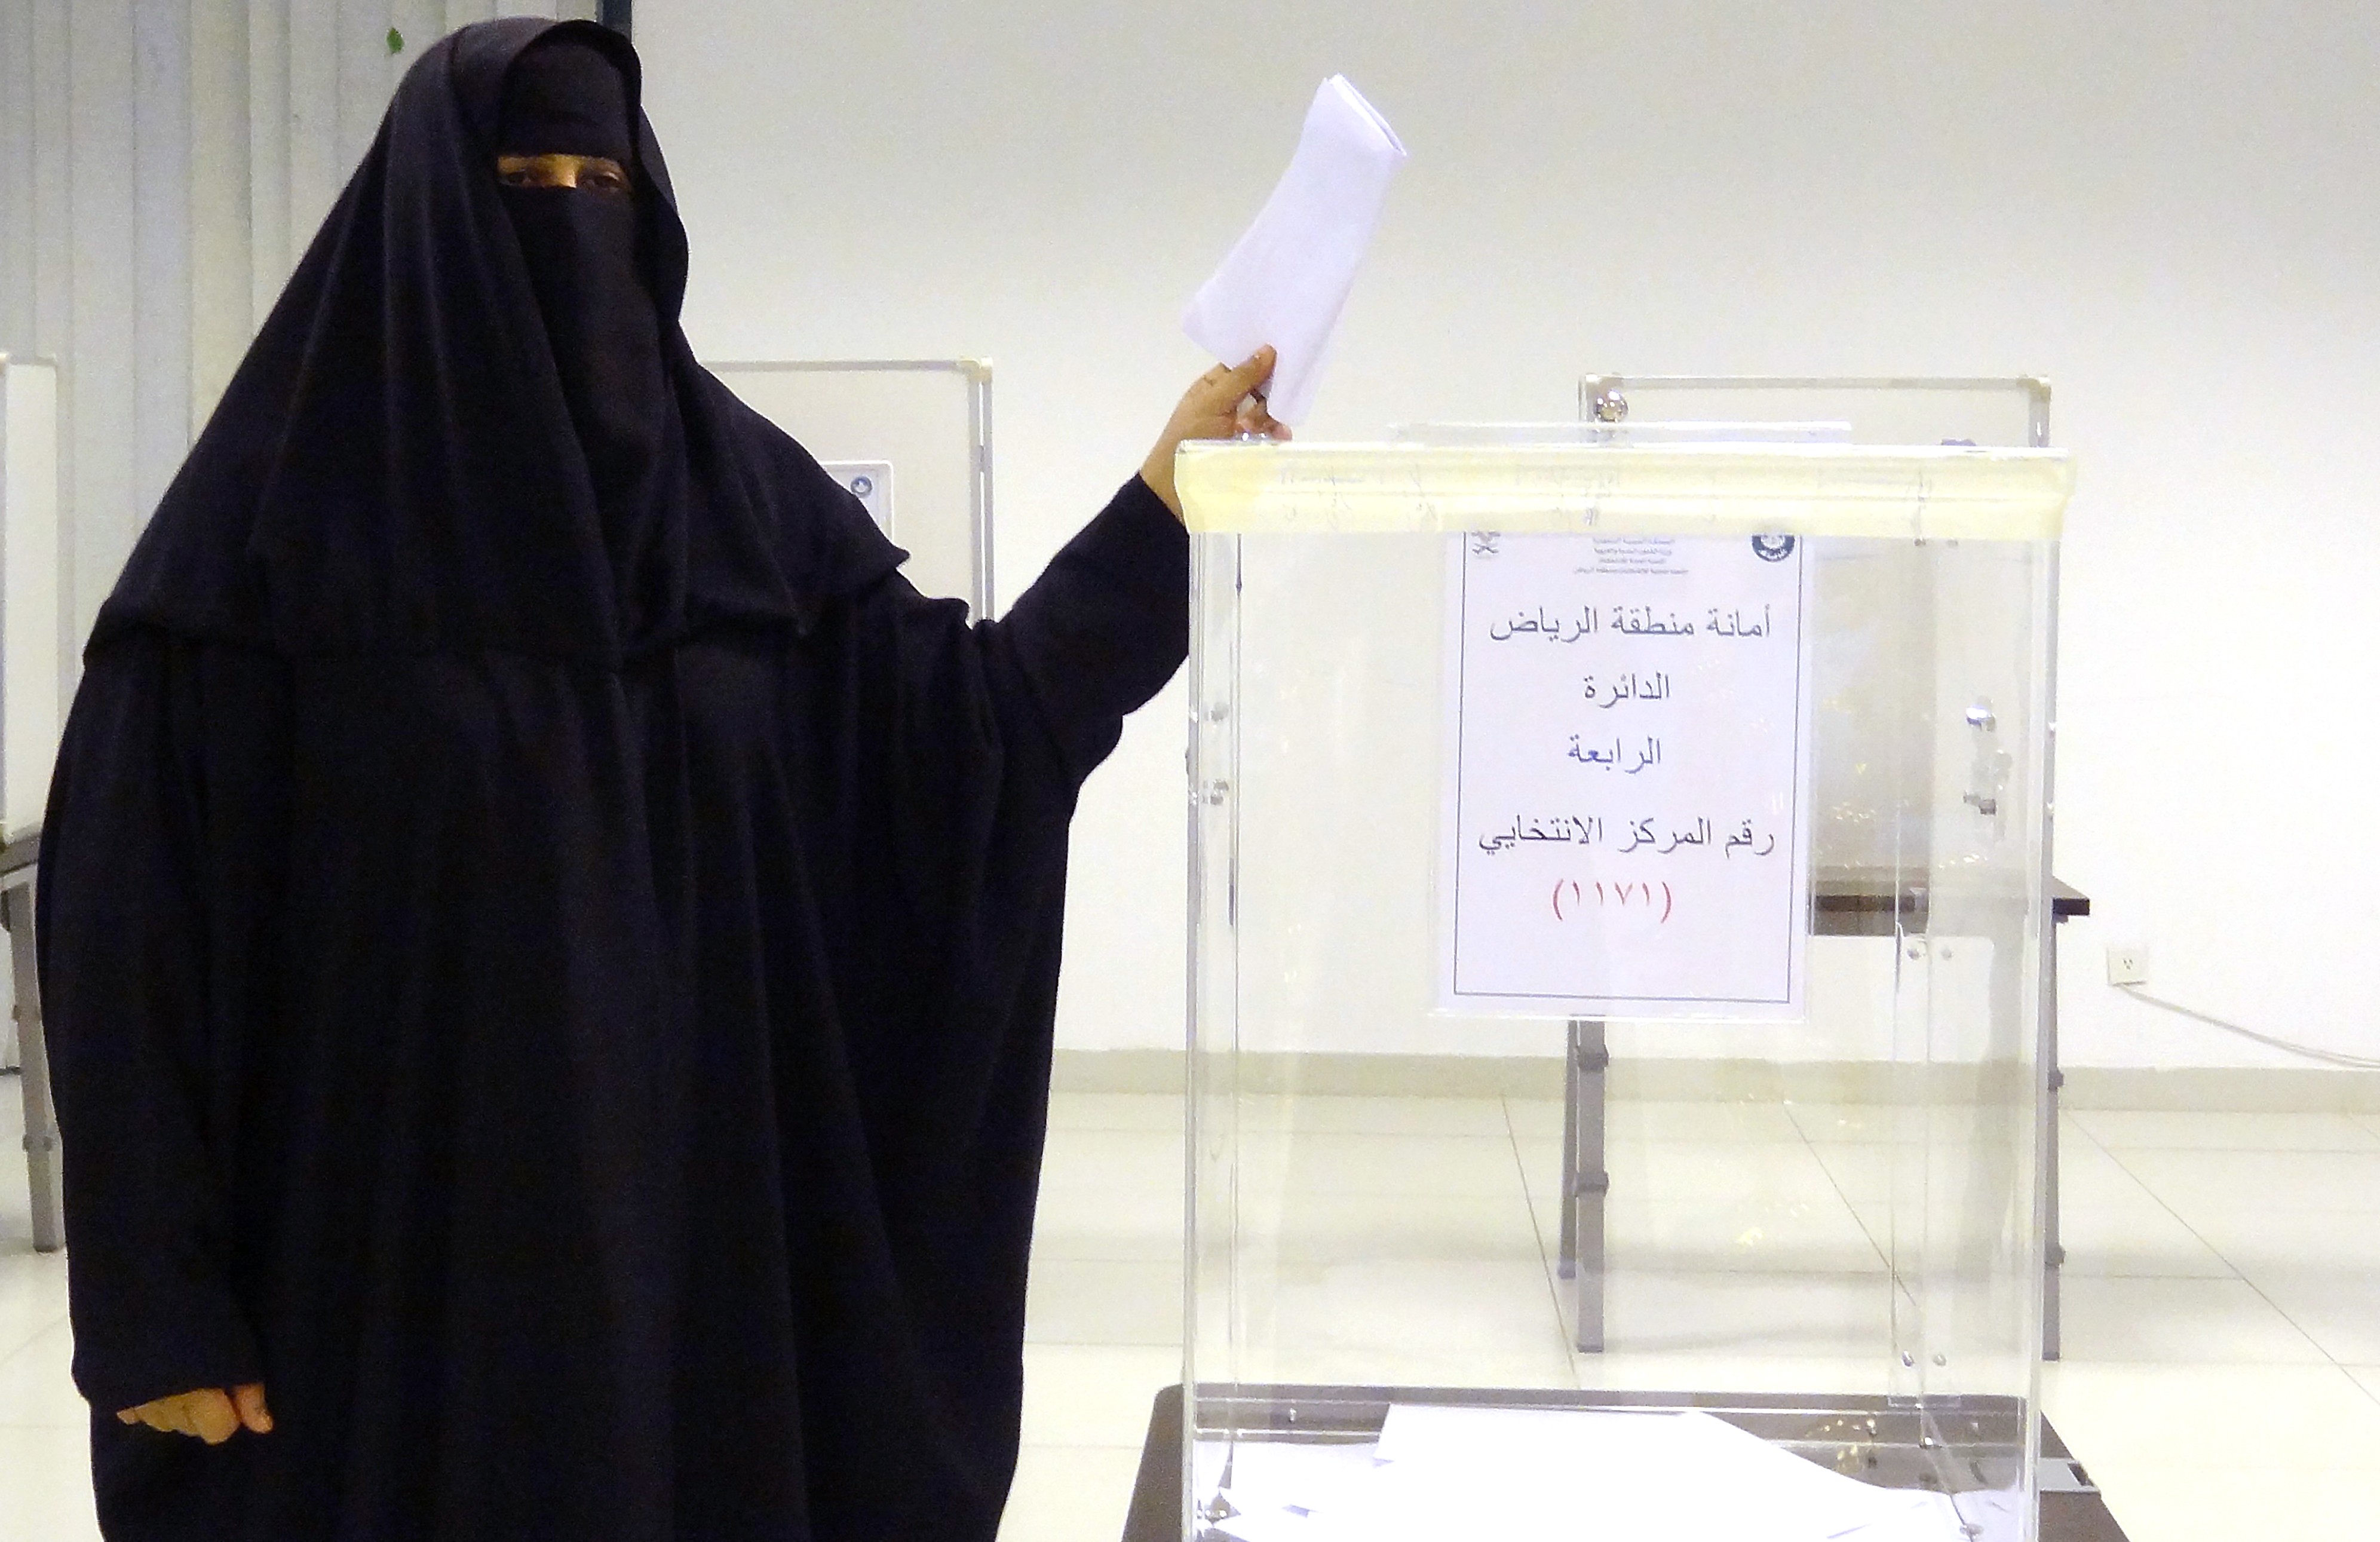 A Saudi woman casts her ballot in an election centre in the Saudi capital of Riyadh, on Dec.12, 2015.